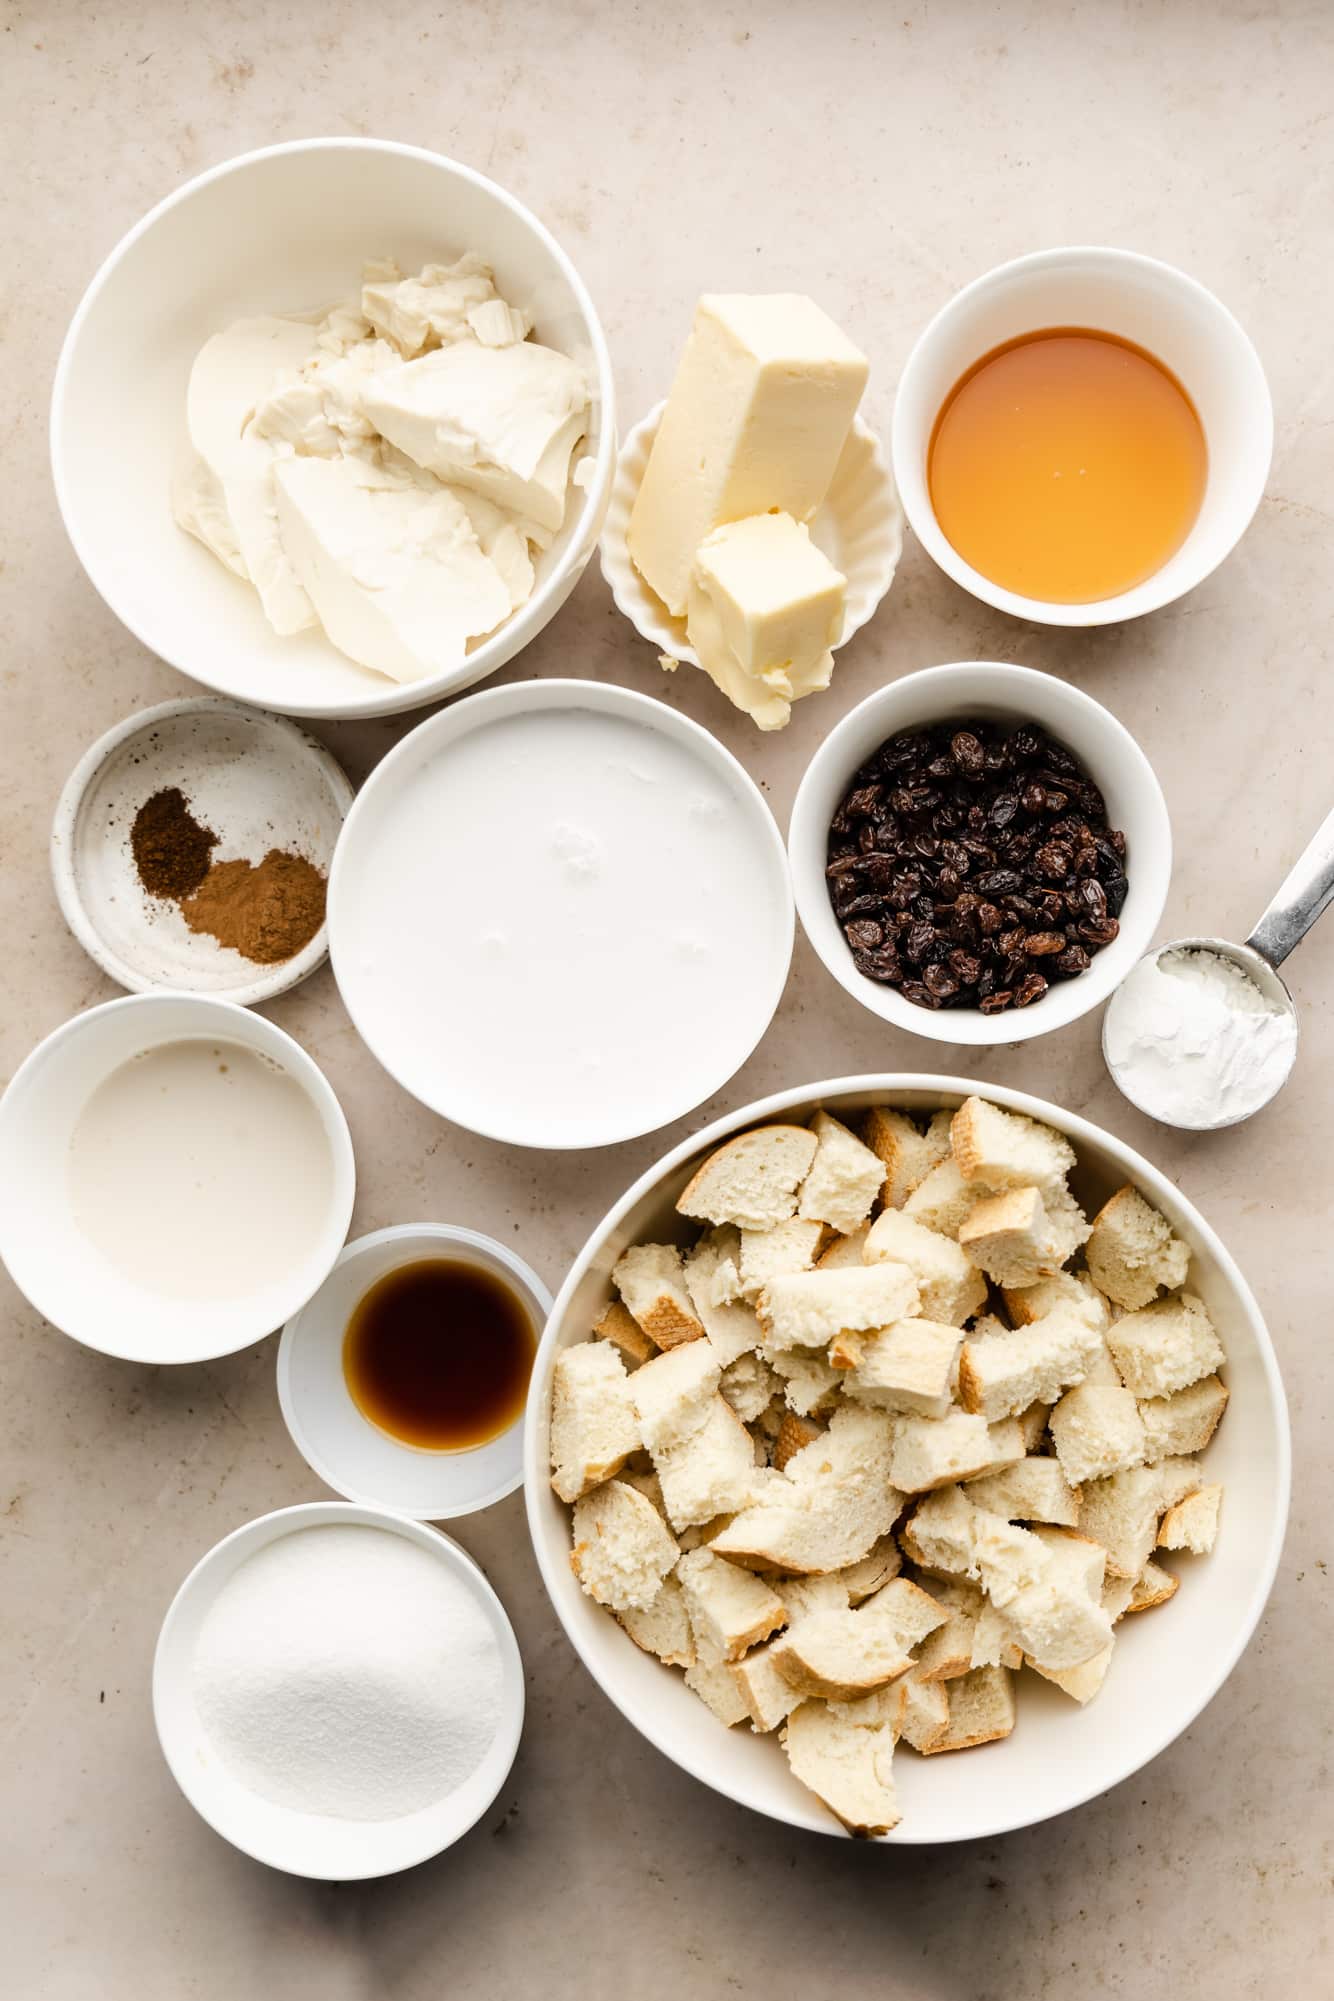 Ingredients for vegan bread pudding in separate white bowls.